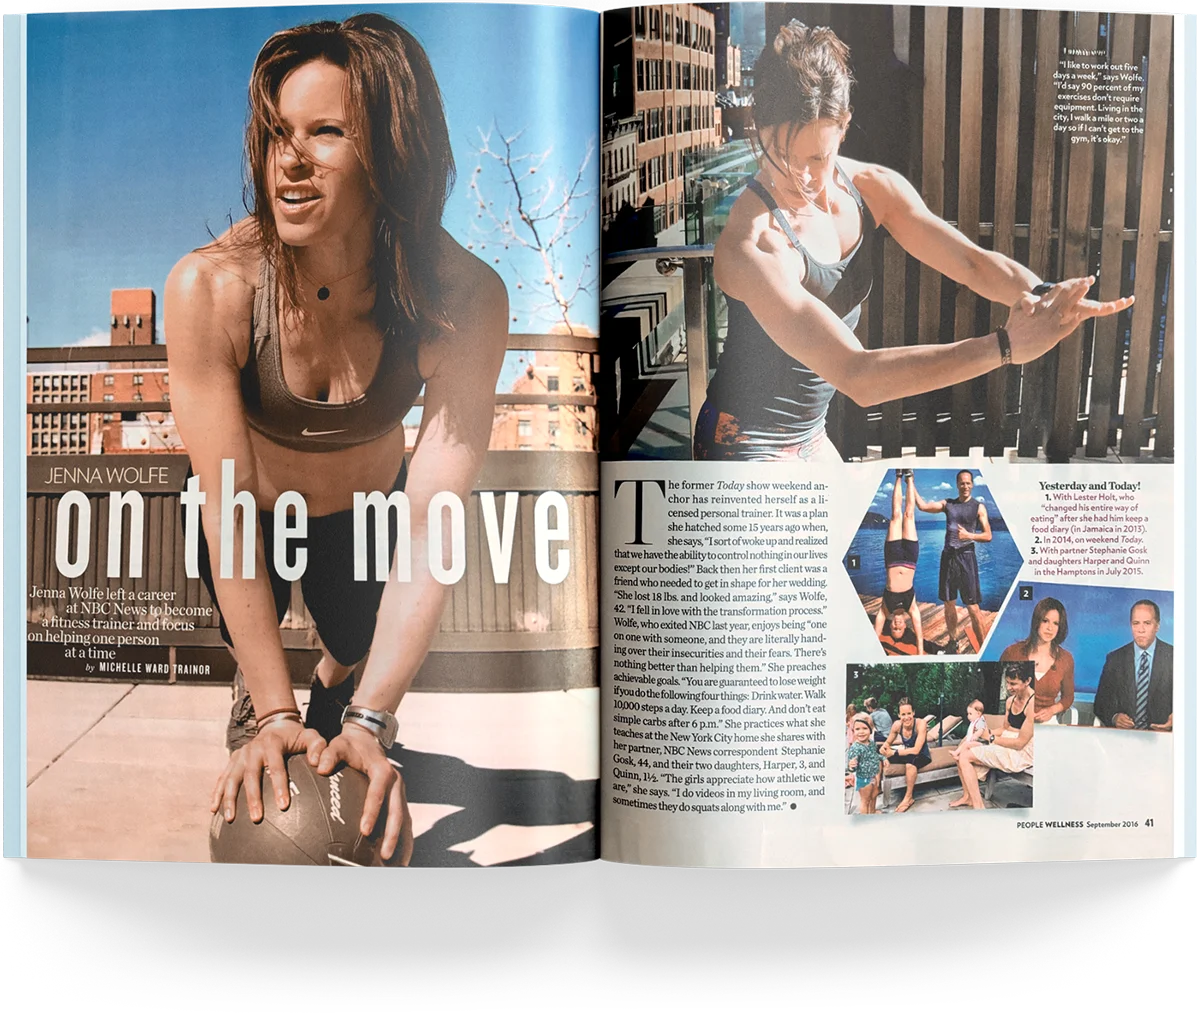 A magazine spread from “People Wellness” featuring Jenna Wolfe. The left page shows Jenna in a dynamic outdoor workout pose, illustrating her energetic and fitness-focused lifestyle. The right page contains smaller photos and text discussing Jenna’s career transition from a TODAY Show weekend anchor to a fitness trainer. The spread highlights her personal journey, her fitness philosophy, and the impact she aims to make on others’ lives through personal training and wellness. This layout effectively captures both her professional achievements and her personal dedication to health and fitness.